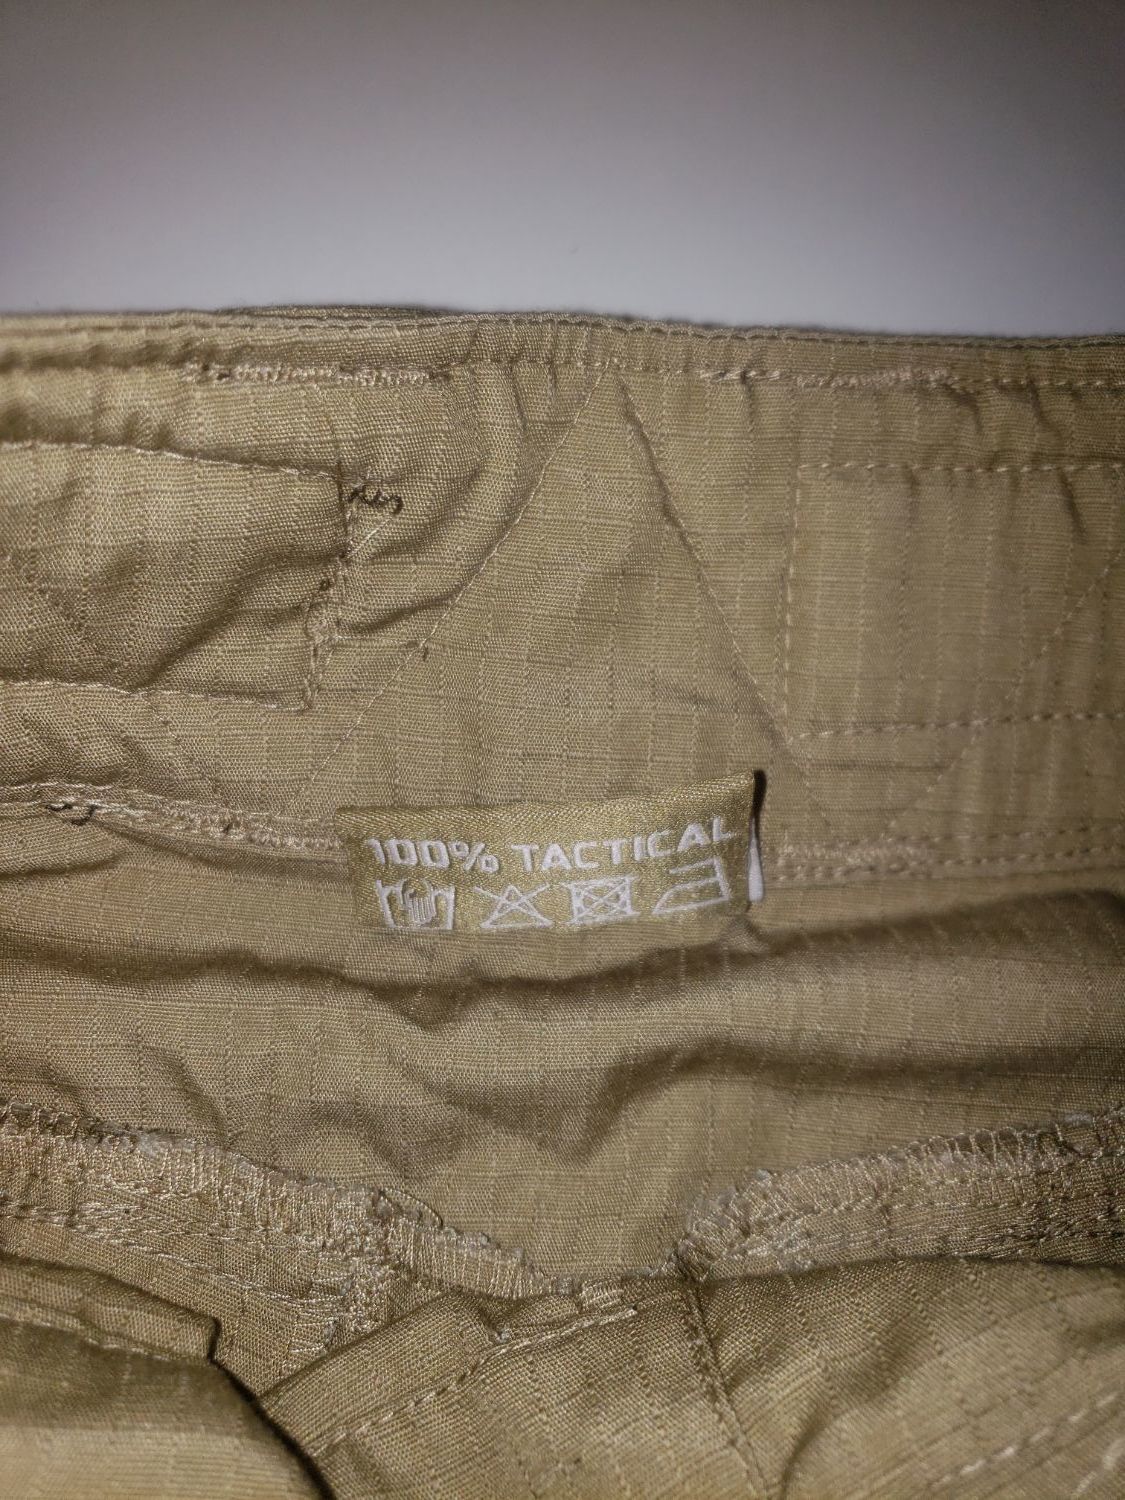 Ww2 helmet viper trousers charger - Gear - Airsoft Forums UK